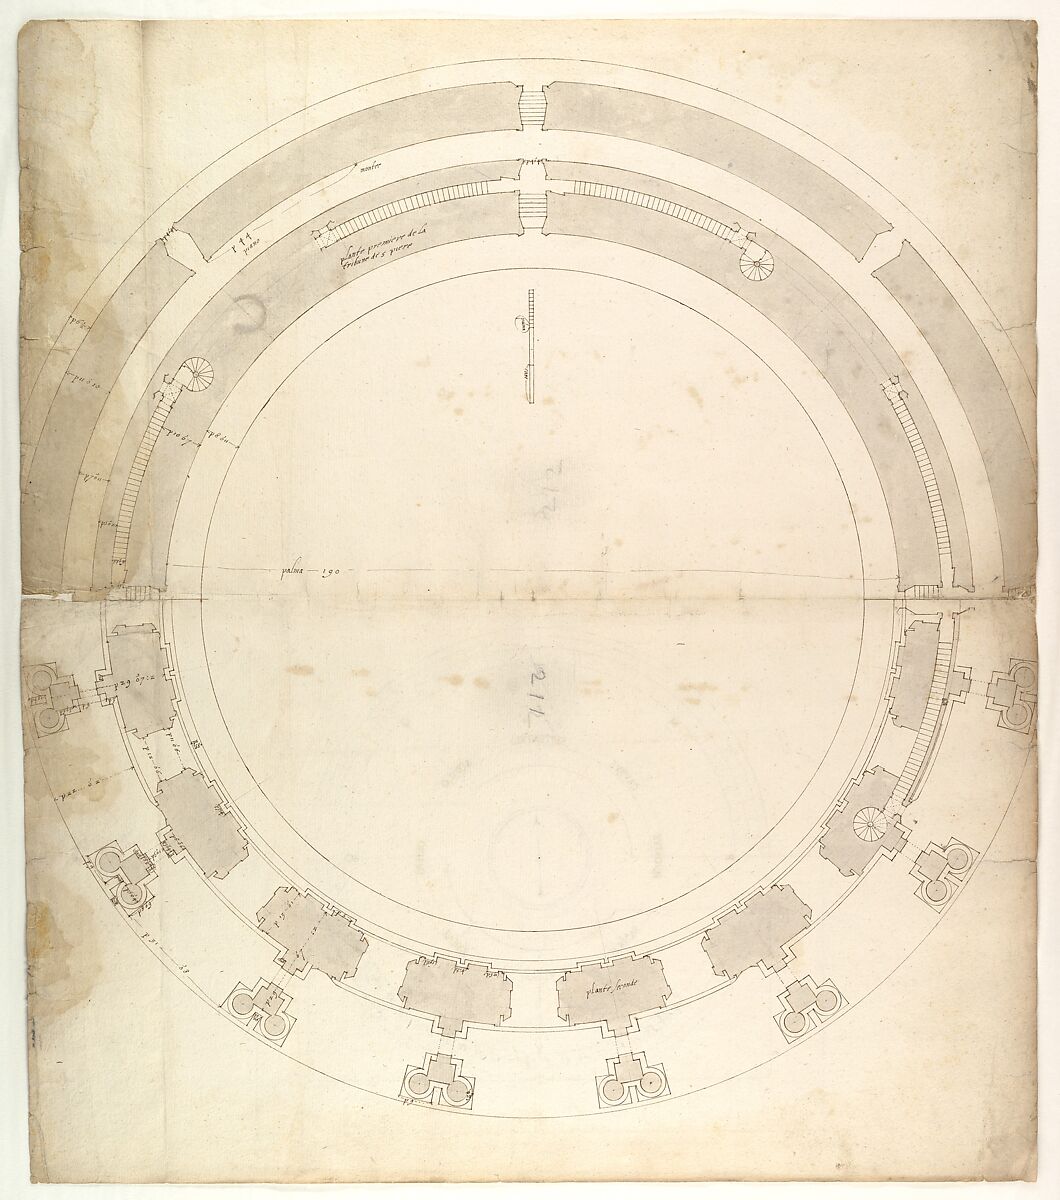 St. Peter's, drum, plan, at two levels (recto) compass (verso), Drawn by Anonymous, French, 16th century, Dark brown ink, black chalk, and incised lines 